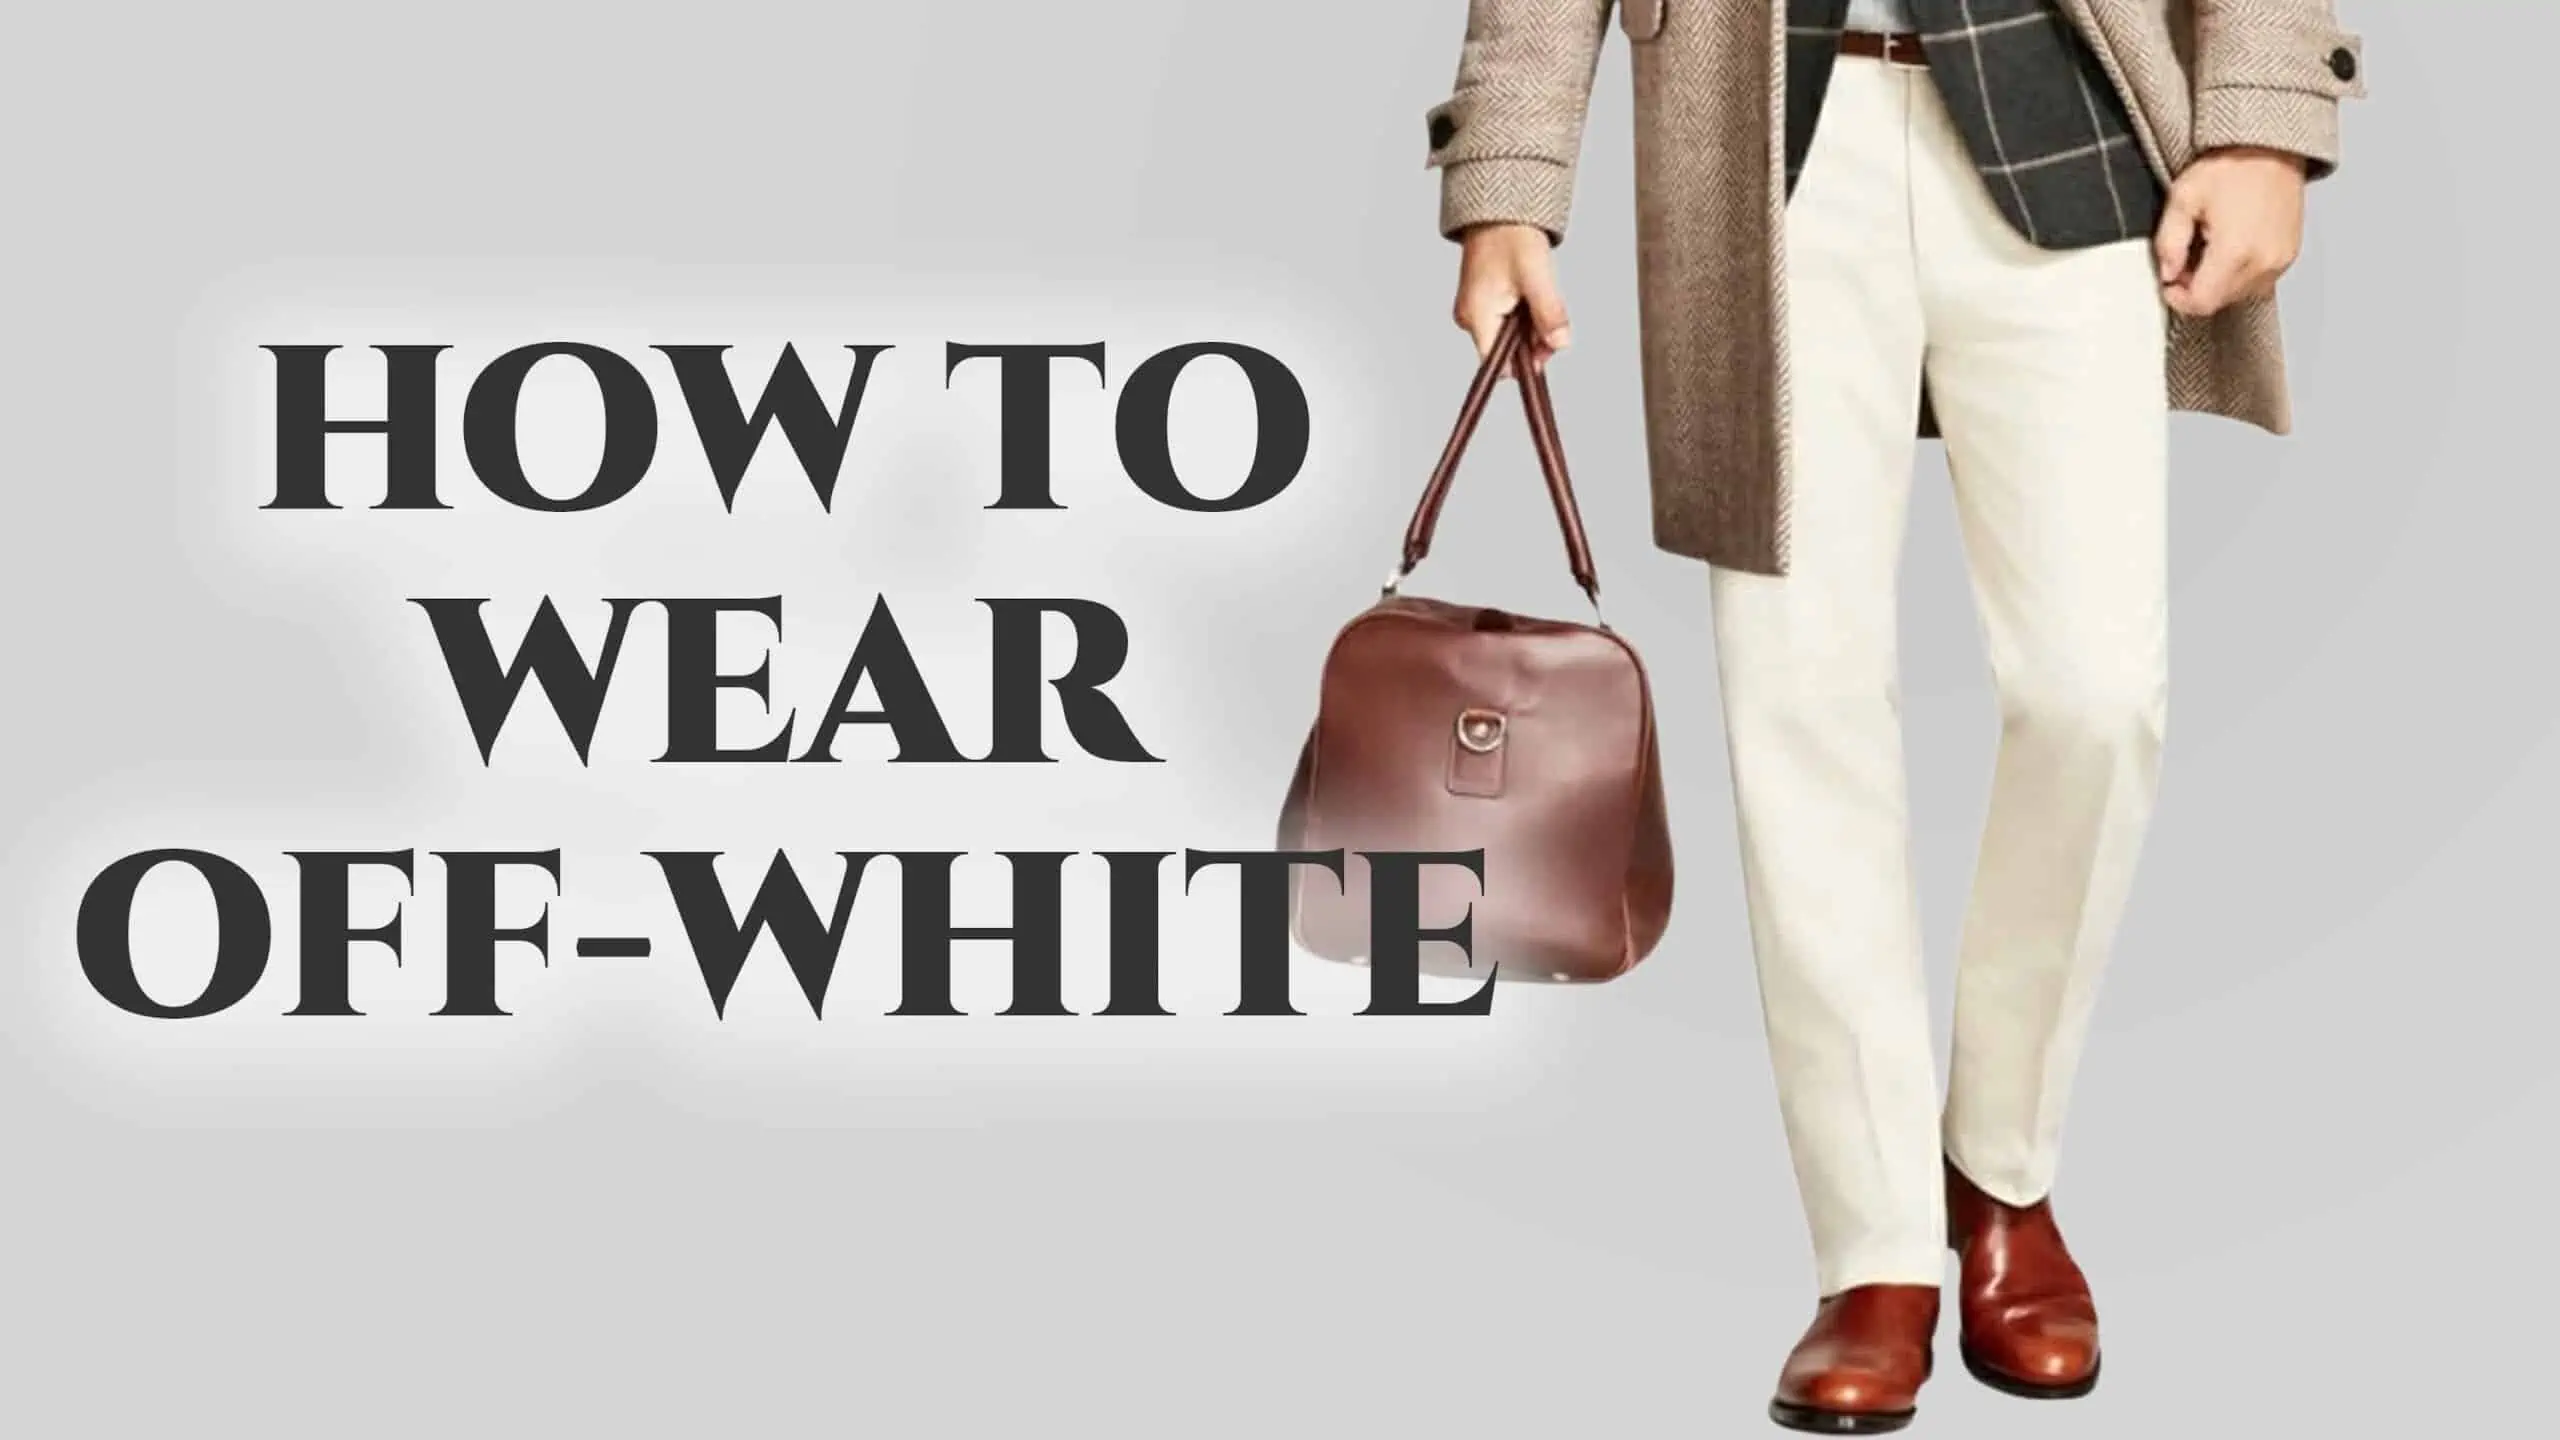 How To Wear Off-White: Ivory, Cream And Stone In Menswear